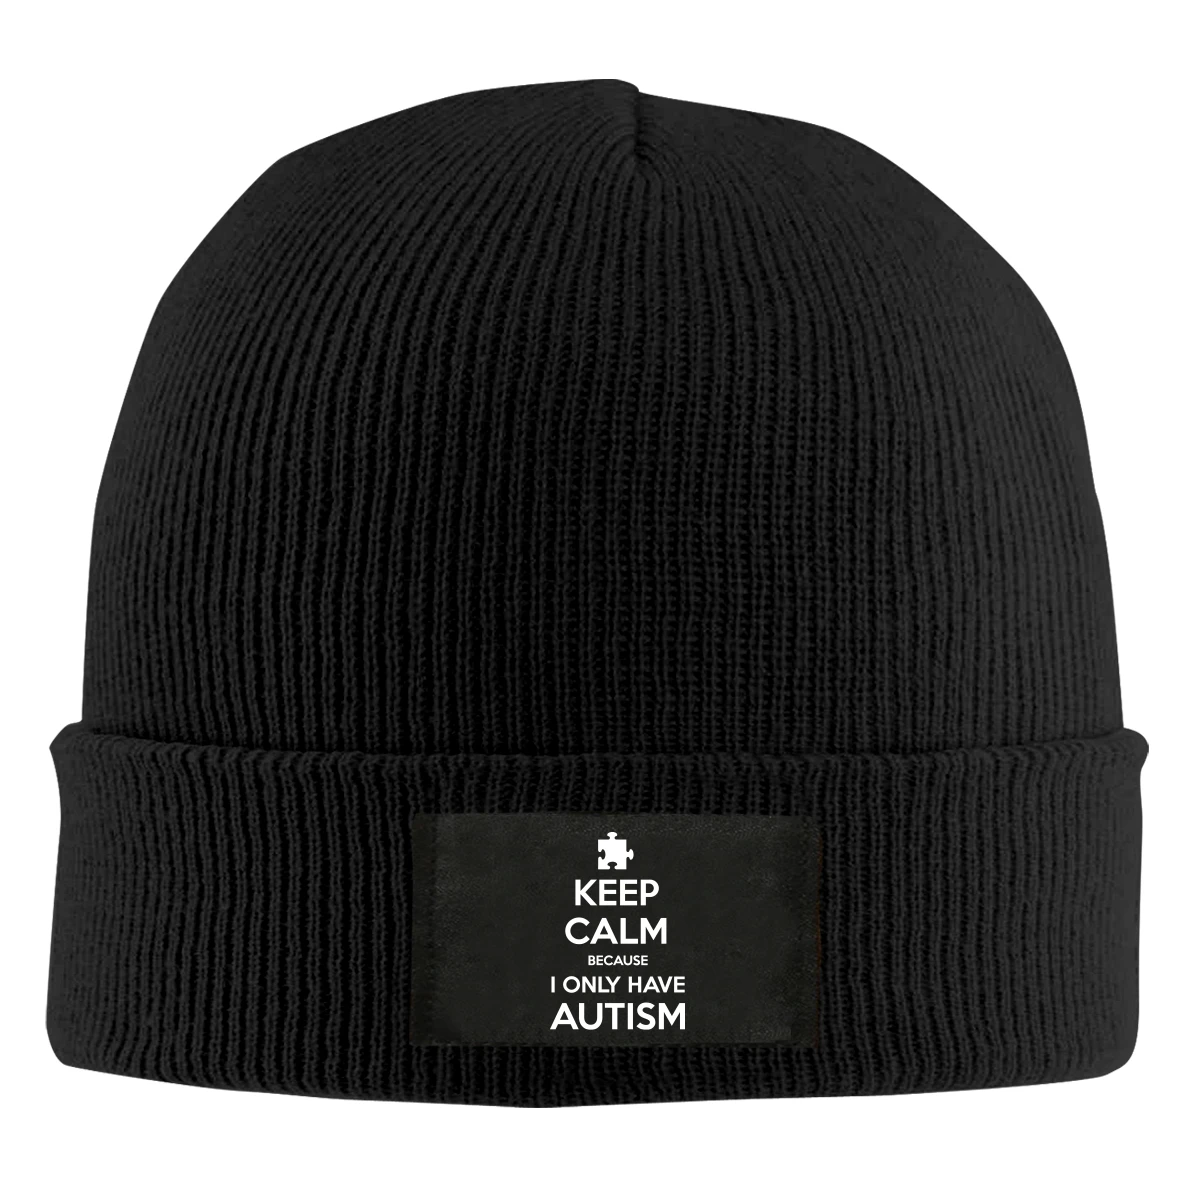 

Keep Calm Because I Only Have Autism Beanie Hats For Men Women With Designs Winter Slouchy Knit Skull Cap